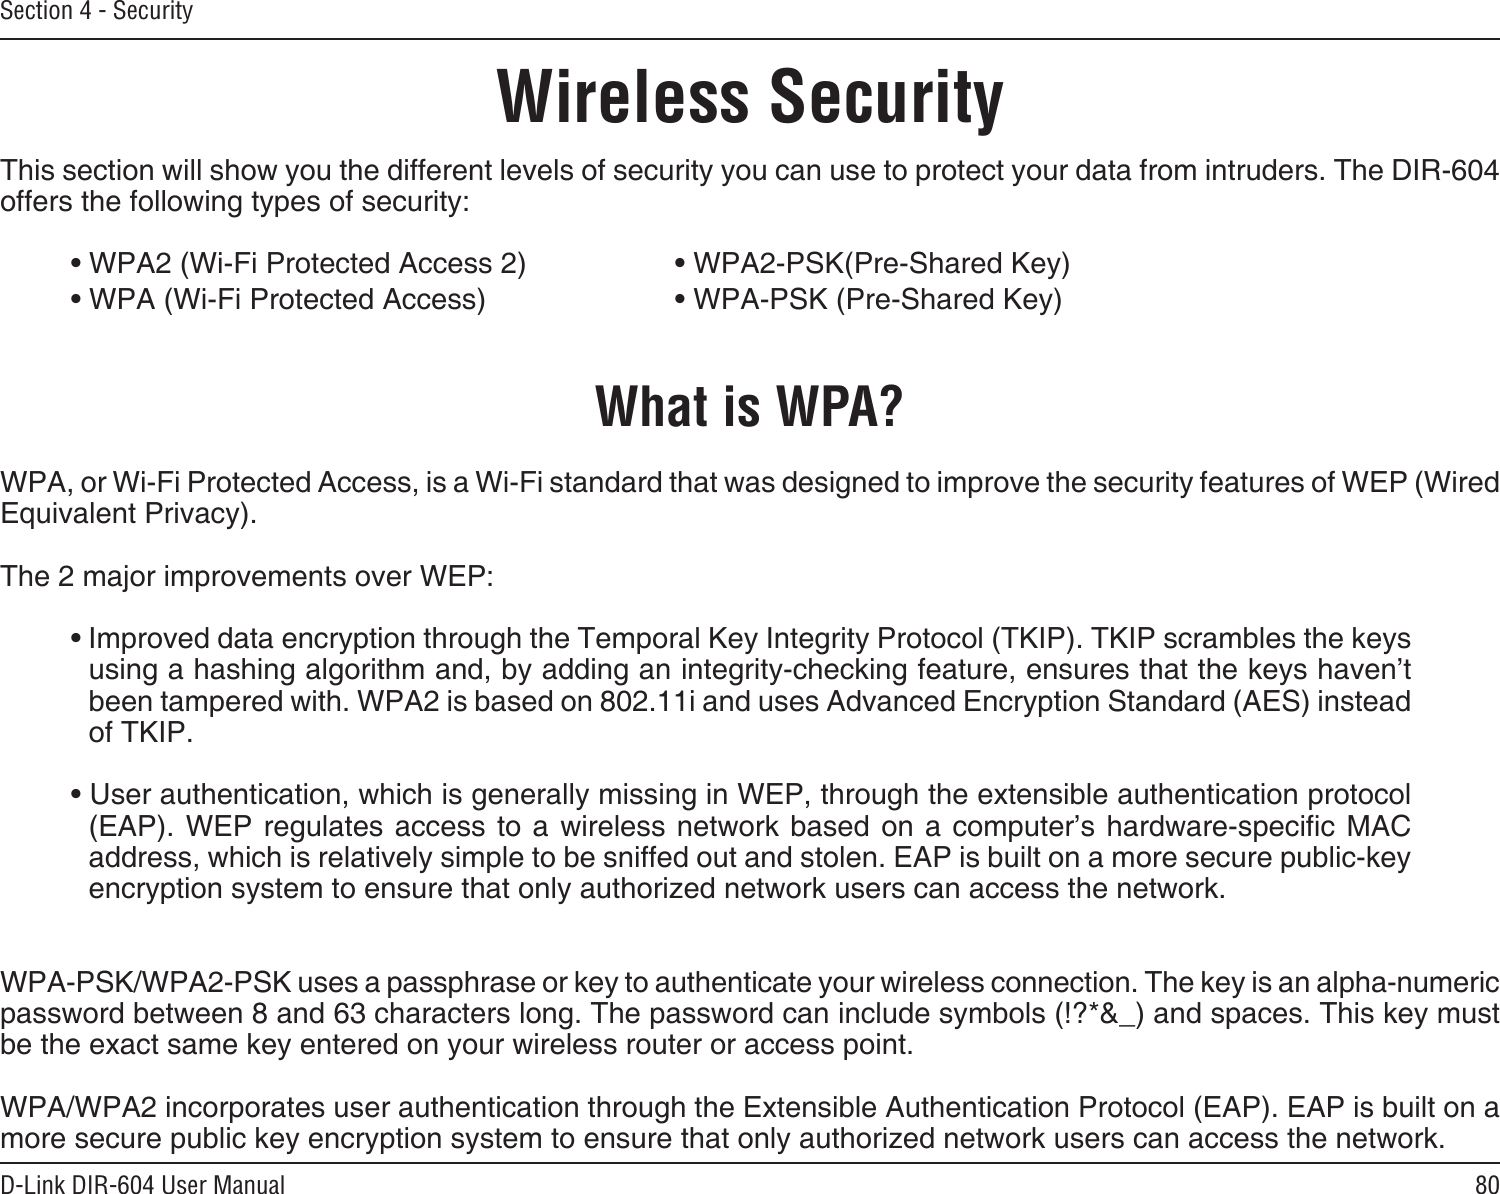 80D-Link DIR-604 User ManualSection 4 - SecurityWireless SecurityThis section will show you the different levels of security you can use to protect your data from intruders. The DIR-604 offers the following types of security:• WPA2 (Wi-Fi Protected Access 2)     • WPA2-PSK(Pre-Shared Key)• WPA (Wi-Fi Protected Access)      • WPA-PSK (Pre-Shared Key)What is WPA?WPA, or Wi-Fi Protected Access, is a Wi-Fi standard that was designed to improve the security features of WEP (Wired Equivalent Privacy).  The 2 major improvements over WEP: • Improved data encryption through the Temporal Key Integrity Protocol (TKIP). TKIP scrambles the keys using a hashing algorithm and, by adding an integrity-checking feature, ensures that the keys haven’t been tampered with. WPA2 is based on 802.11i and uses Advanced Encryption Standard (AES) instead of TKIP.• User authentication, which is generally missing in WEP, through the extensible authentication protocol (EAP). WEP  regulates  access to a wireless  network  based on a computer’s  hardware-specic  MAC address, which is relatively simple to be sniffed out and stolen. EAP is built on a more secure public-key encryption system to ensure that only authorized network users can access the network.WPA-PSK/WPA2-PSK uses a passphrase or key to authenticate your wireless connection. The key is an alpha-numeric password between 8 and 63 characters long. The password can include symbols (!?*&amp;_) and spaces. This key must be the exact same key entered on your wireless router or access point.WPA/WPA2 incorporates user authentication through the Extensible Authentication Protocol (EAP). EAP is built on a more secure public key encryption system to ensure that only authorized network users can access the network.